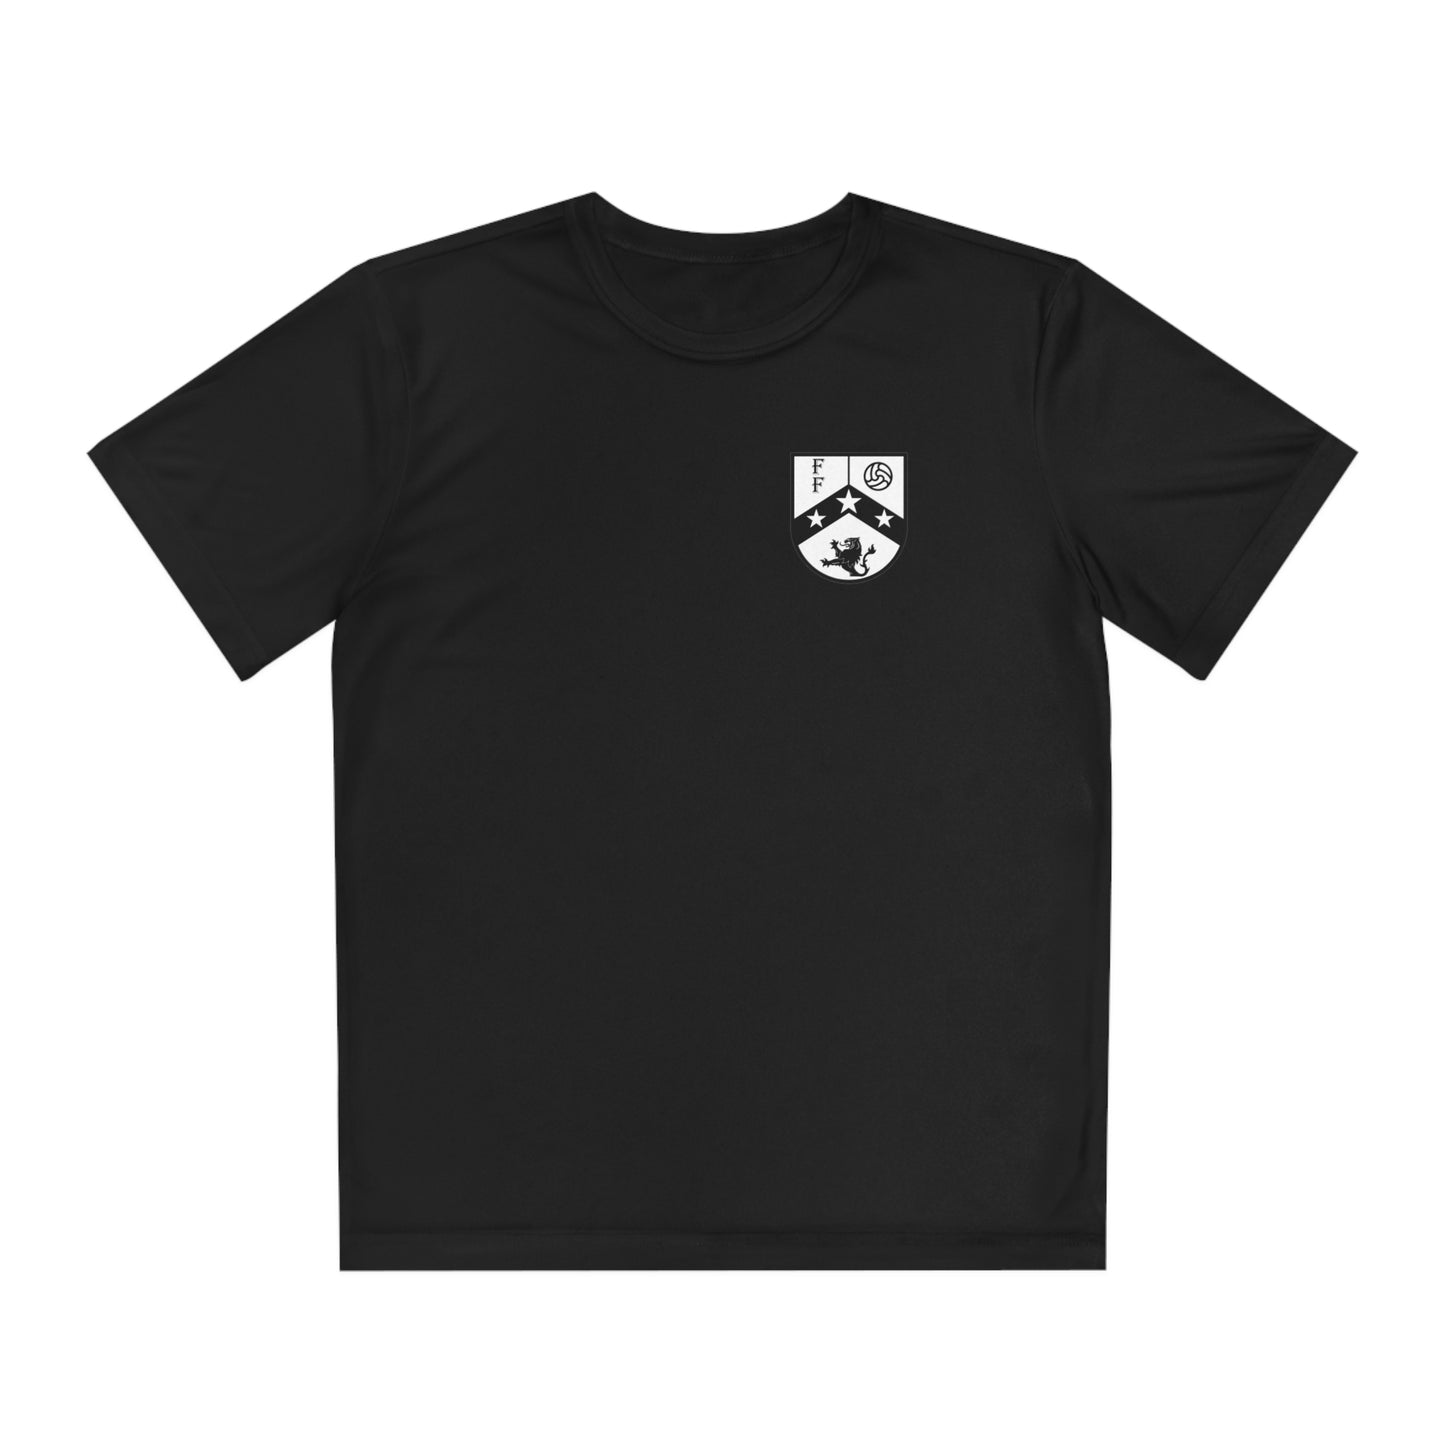 FIERCE FEARLESS & FOCUSED Youth Athletic T-Shirt (Unisex)